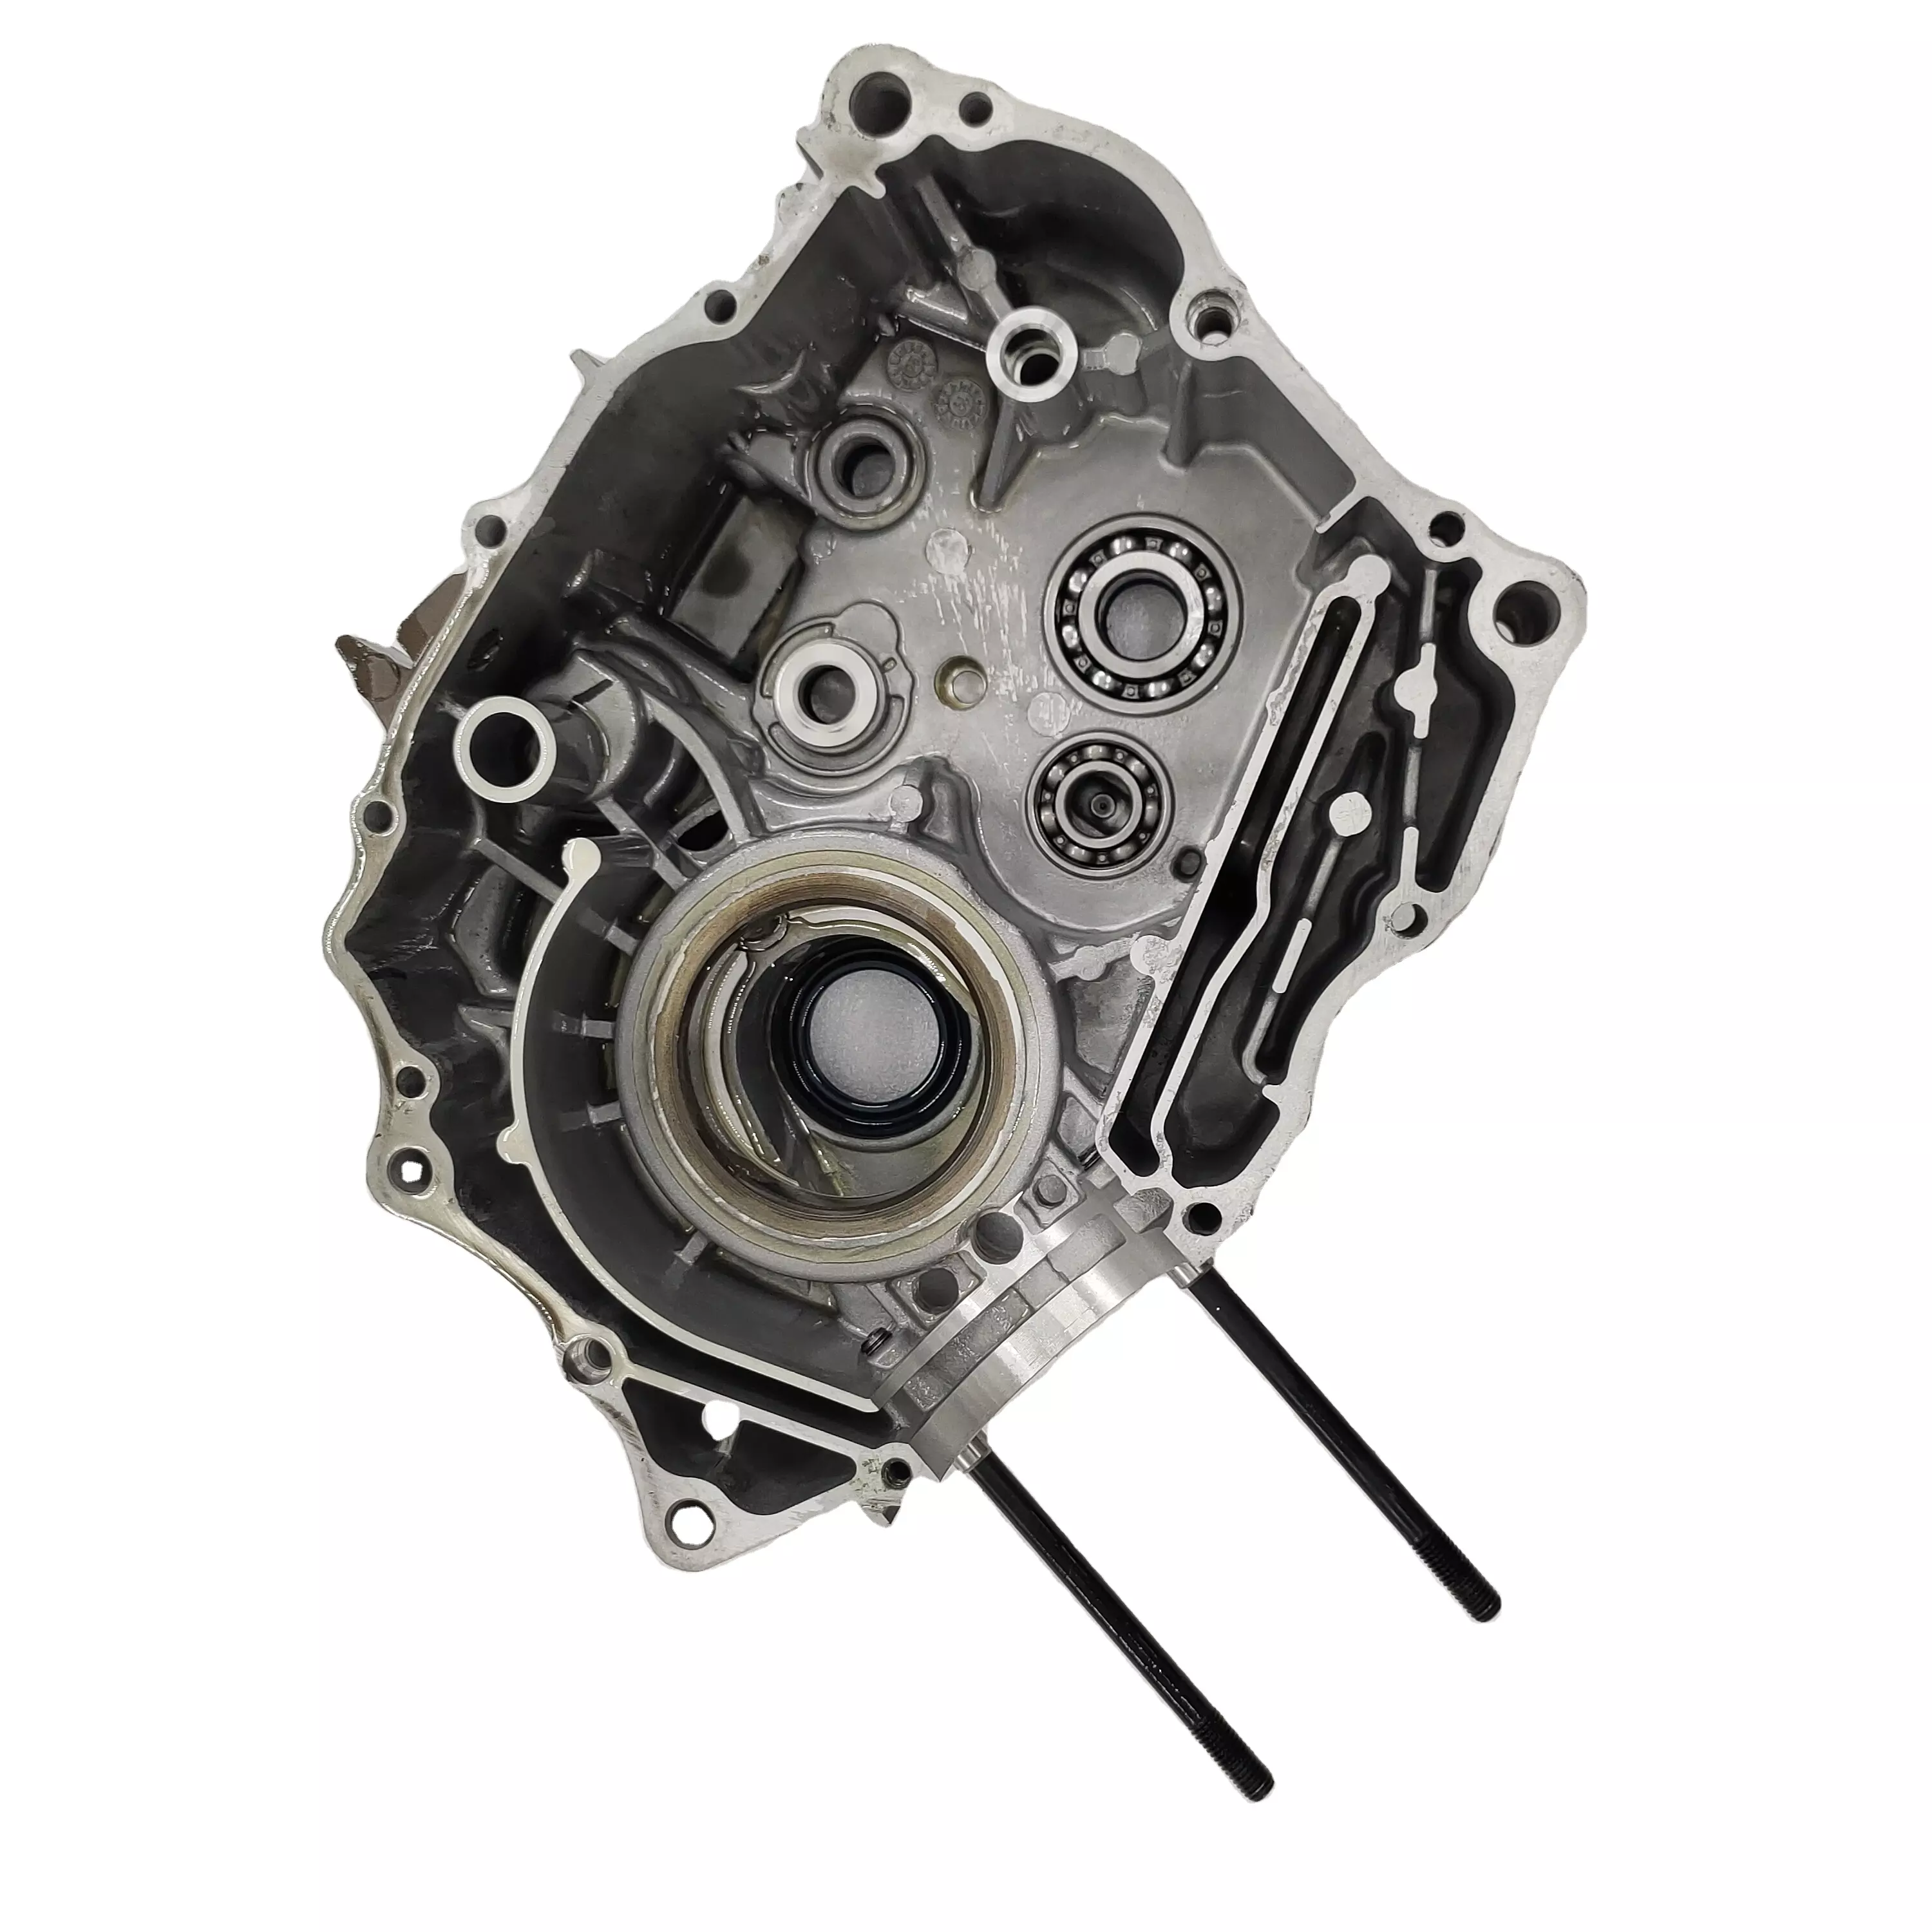 motorcycle LF150cc 250cc engine parts  Left crankcase high precison tricycle engine parts high quality factory direct sale